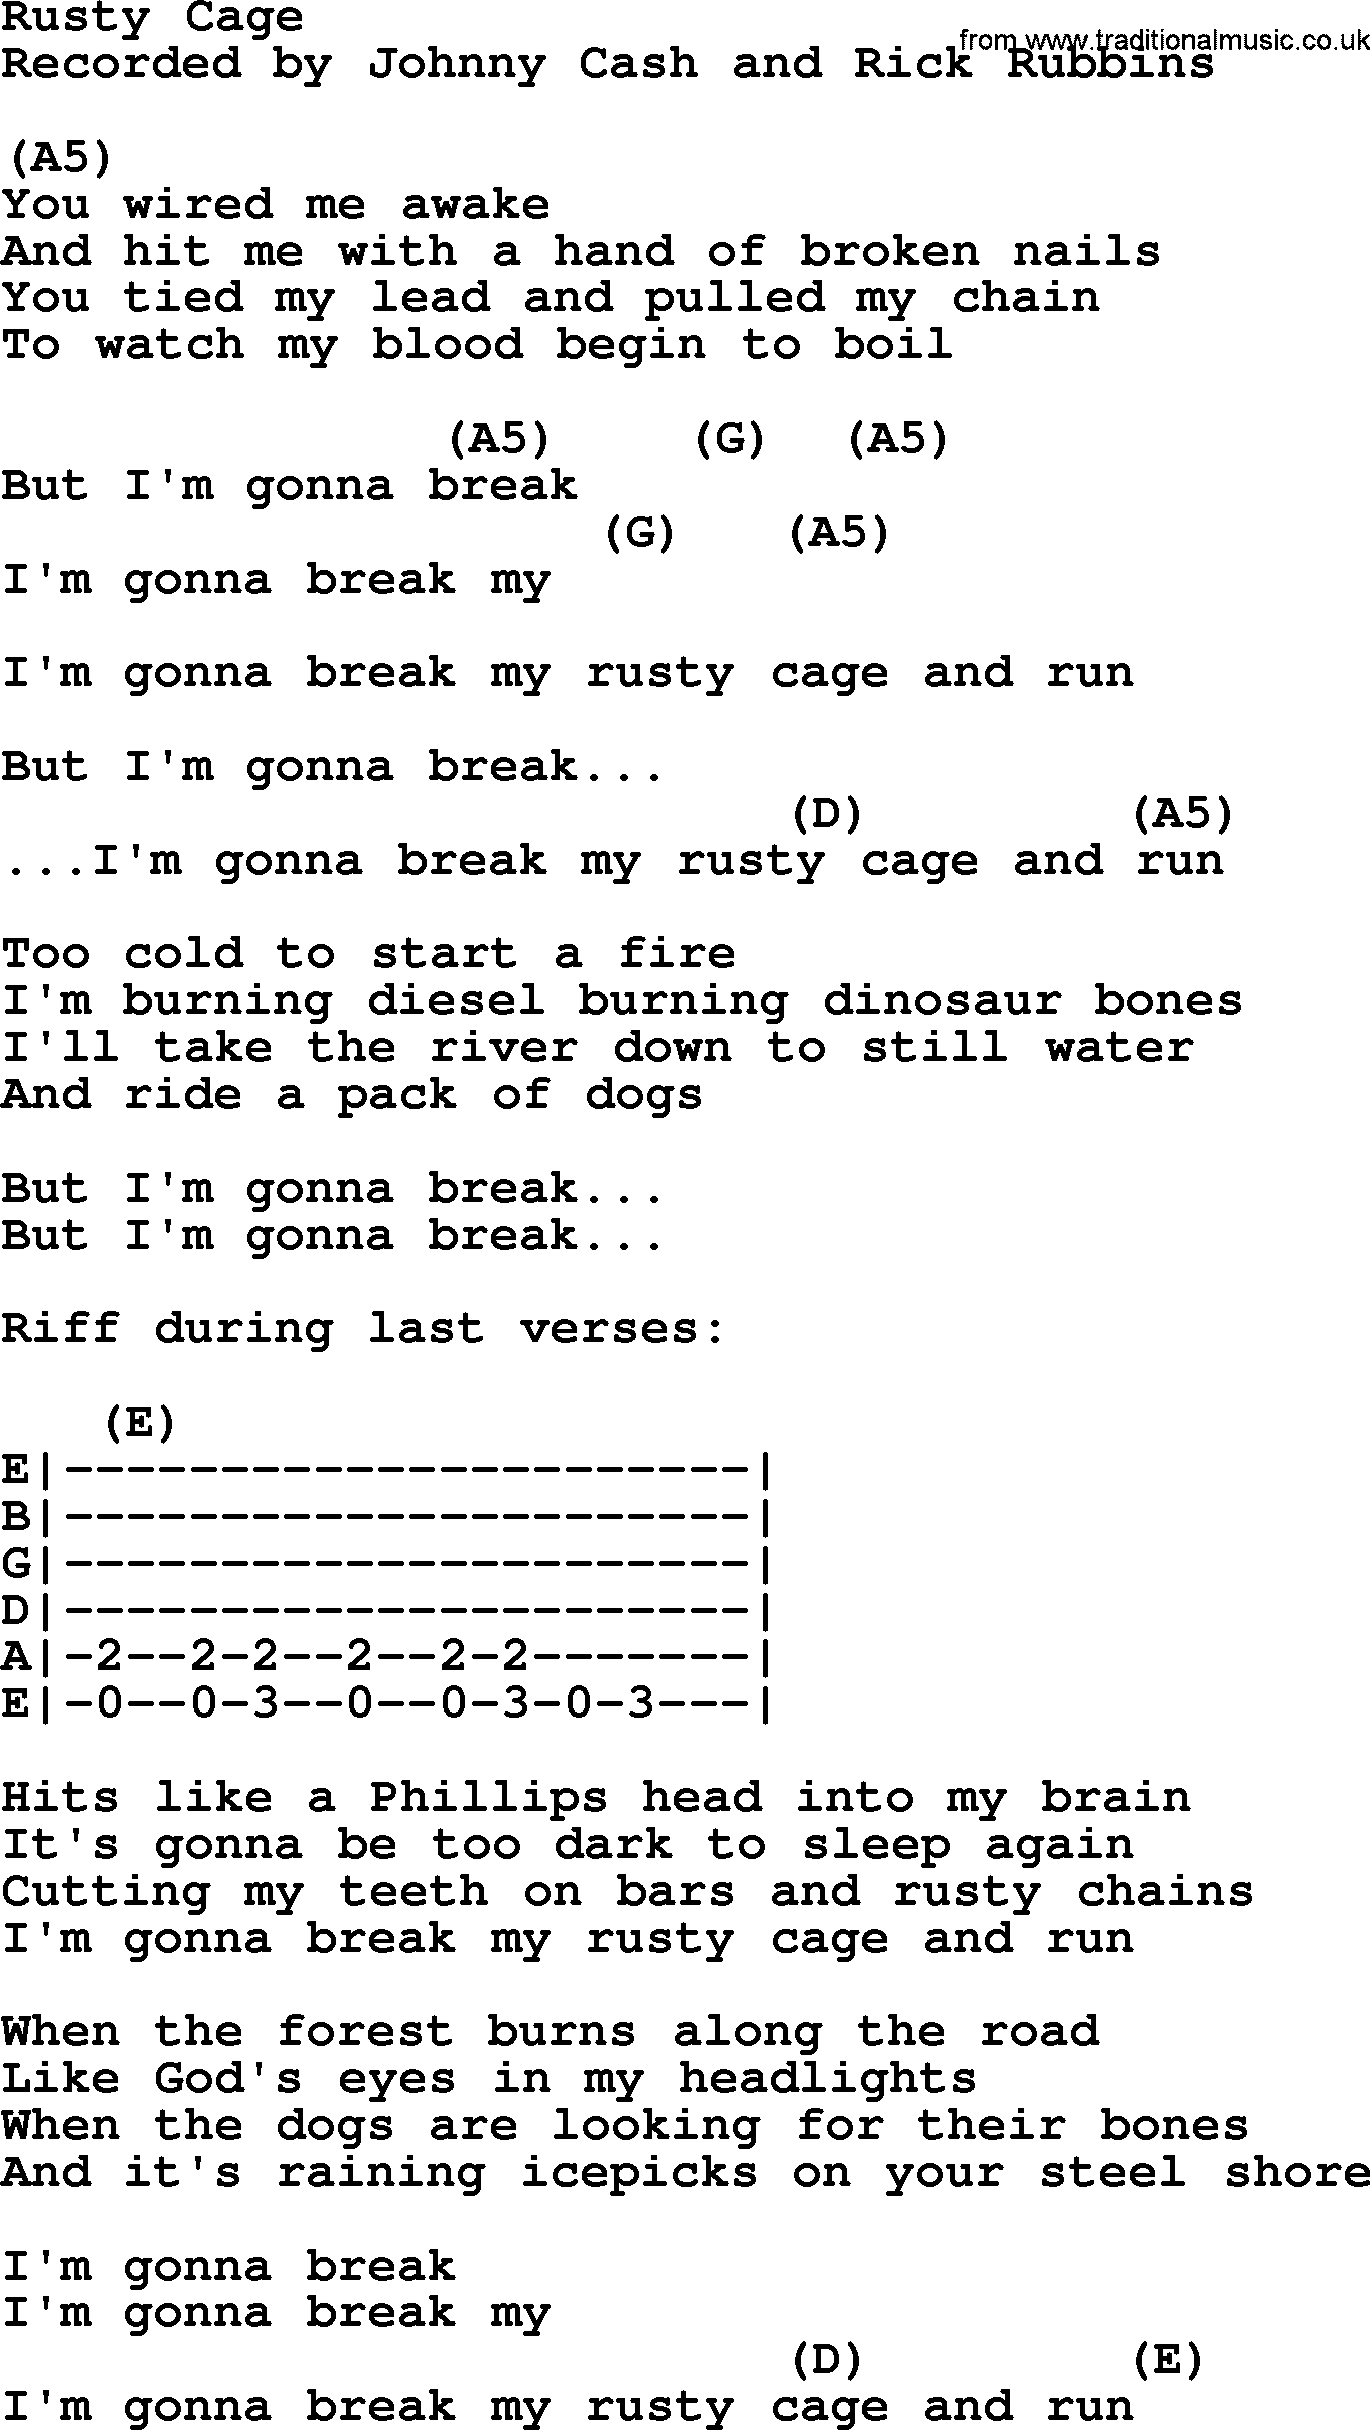 Johnny Cash song Rusty Cage, lyrics and chords